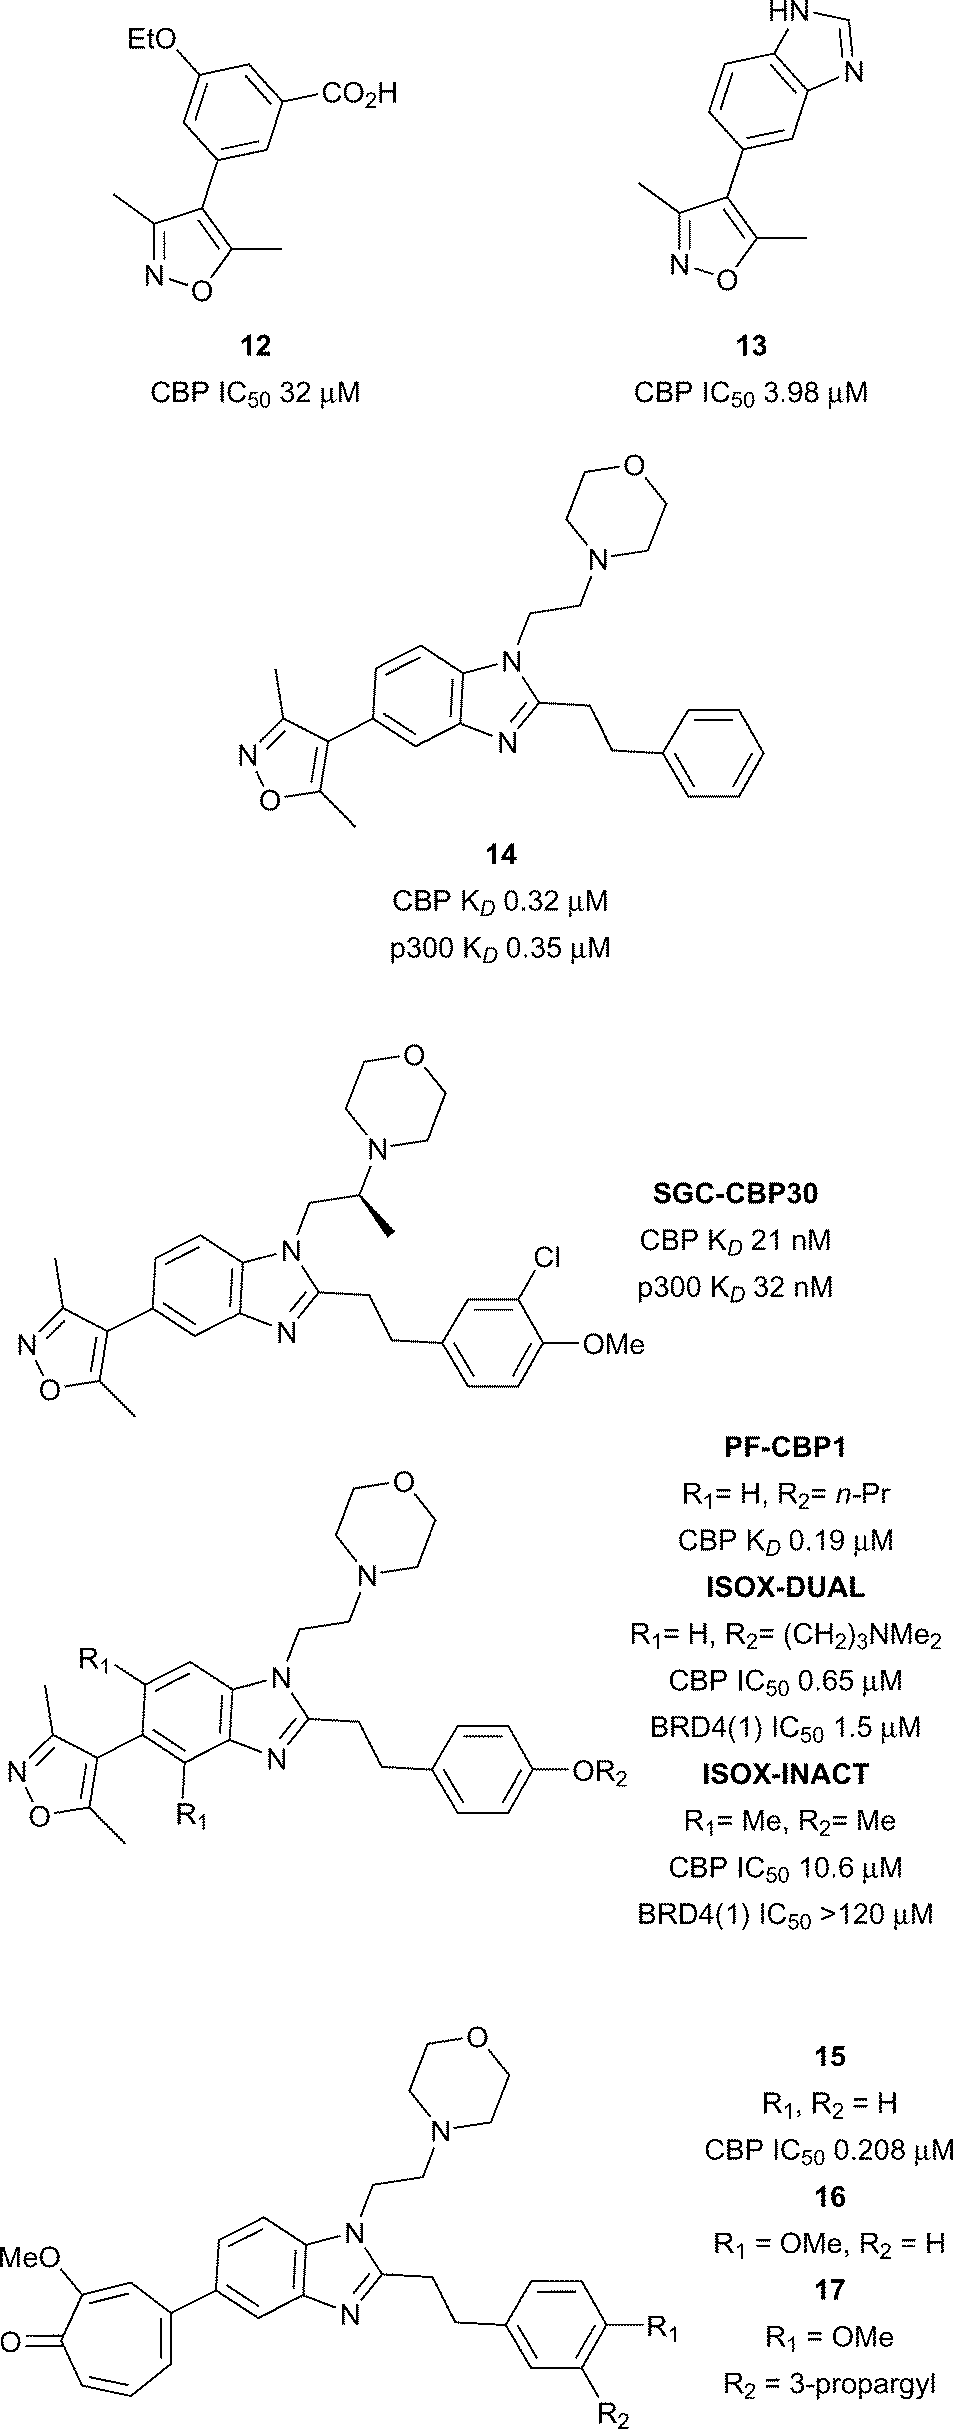 Chemical probes and inhibitors of bromodomains outside the BET 